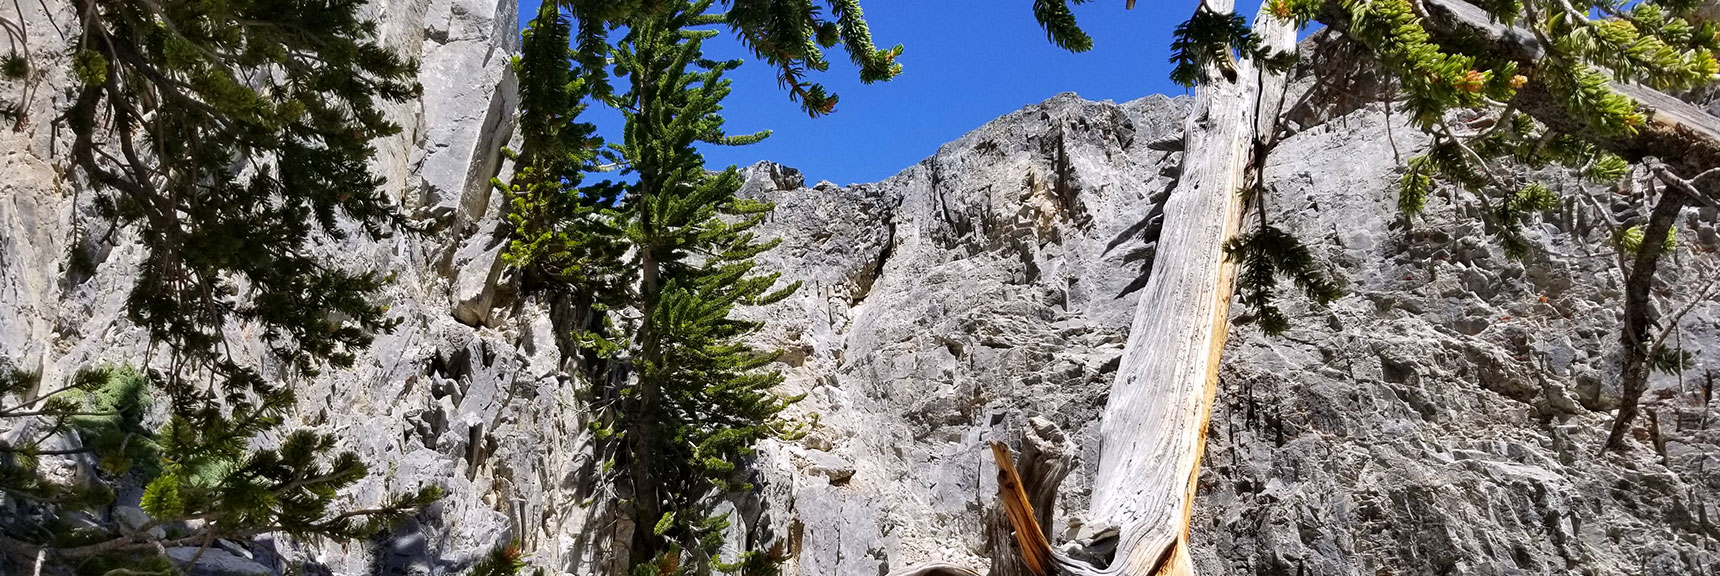 Final Rise to the Mummy Mt. East Approach Ledge in Mt. Charleston Wilderness, Nevada